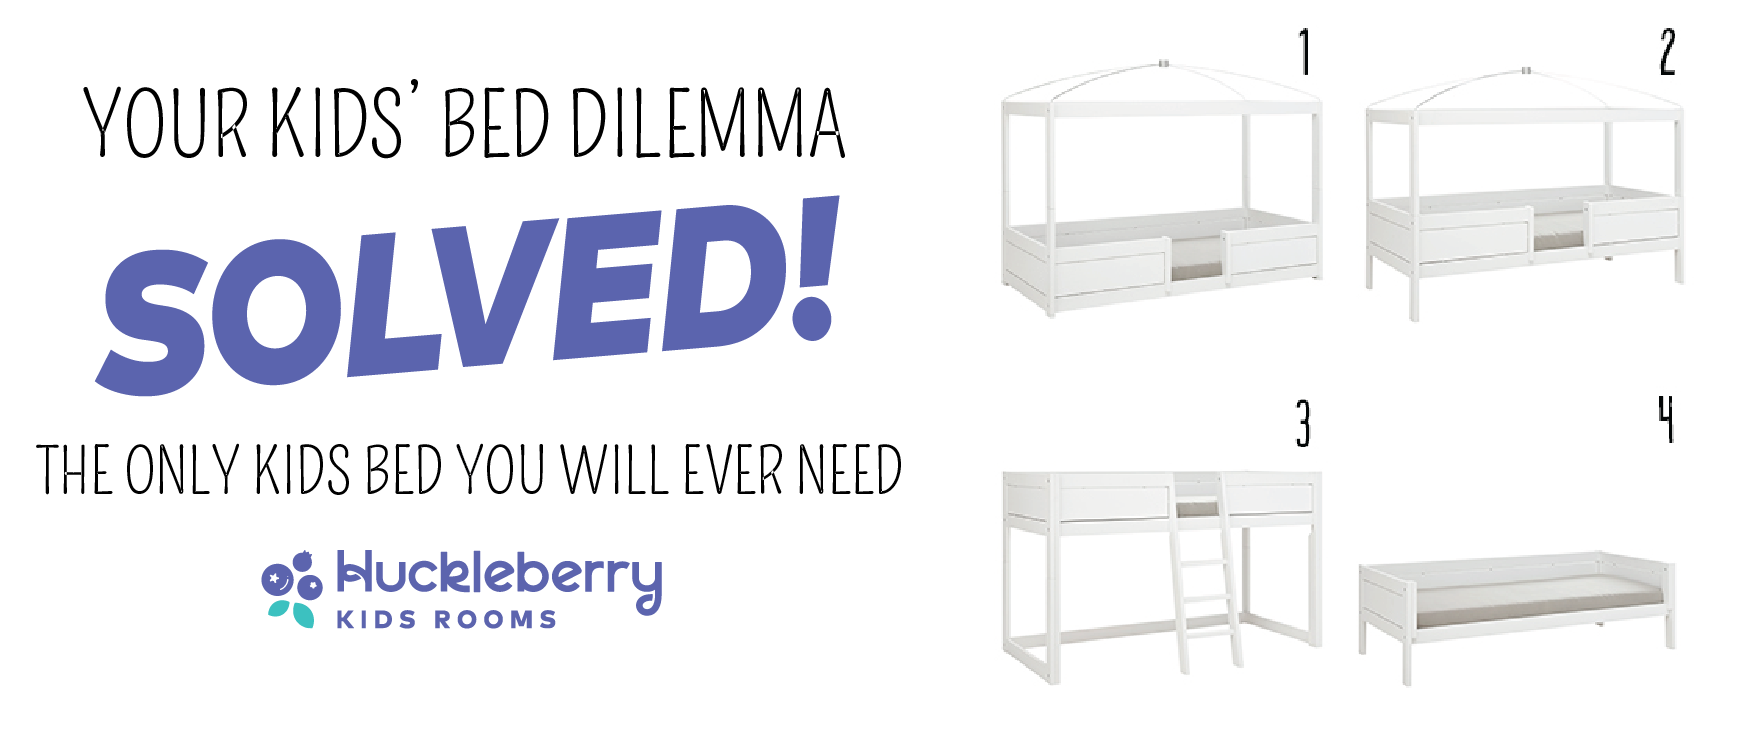 Huckleberry Kids Rooms - 4-IN-1 Bed, A kids bed that grows with your child